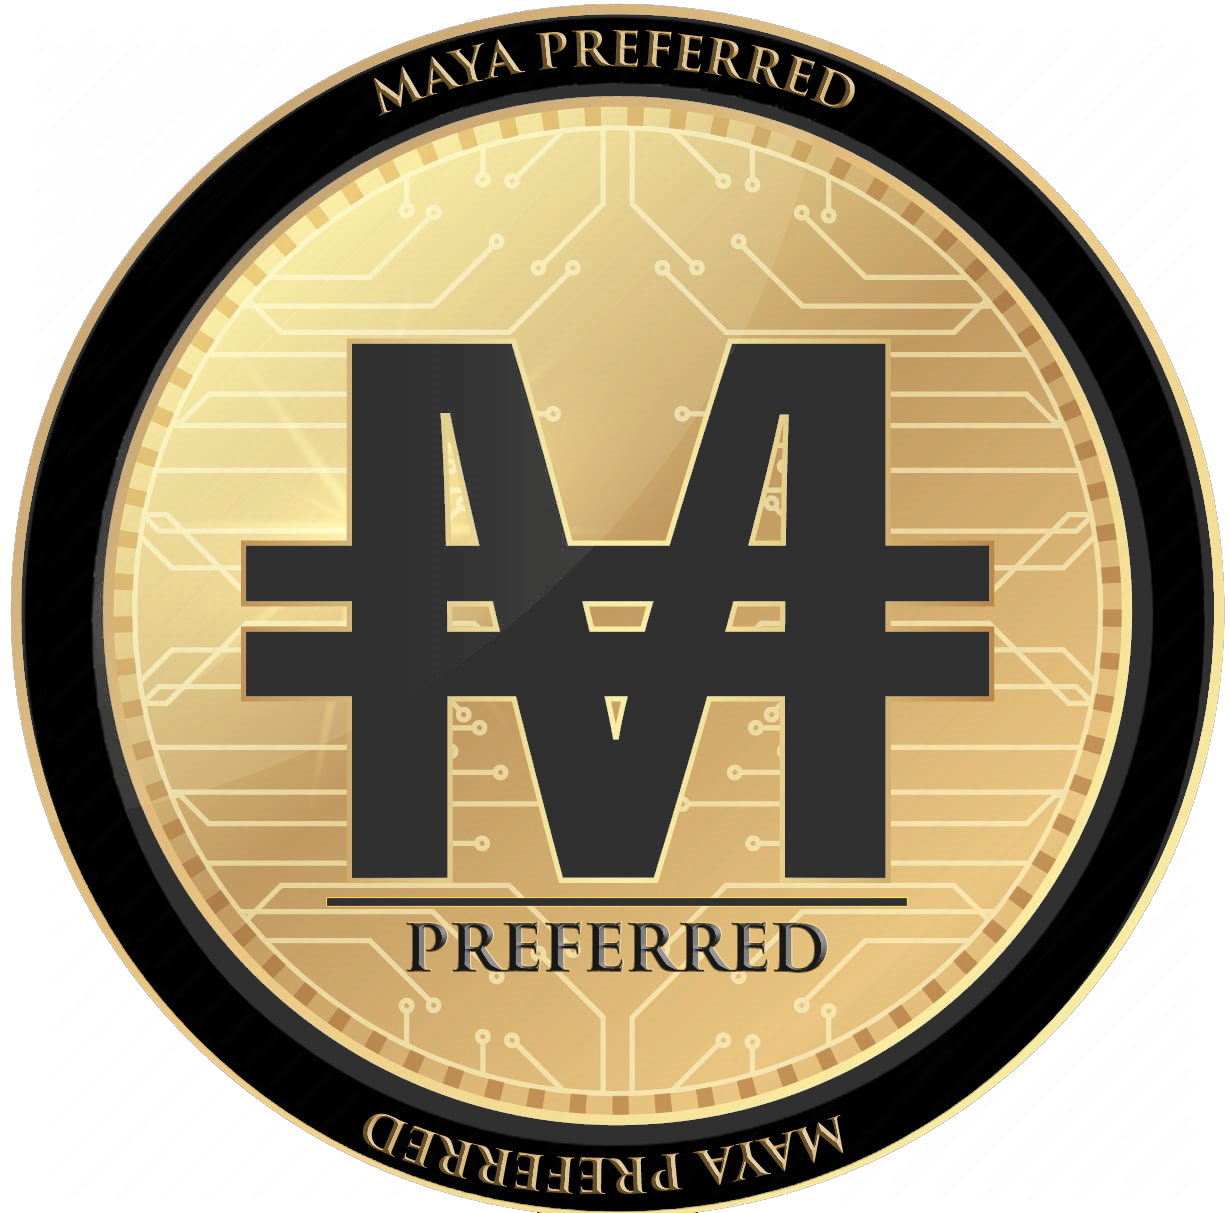 Maya Preferred 223 (MAPR) stabilizes BITCOIN with Gold and Silver backing